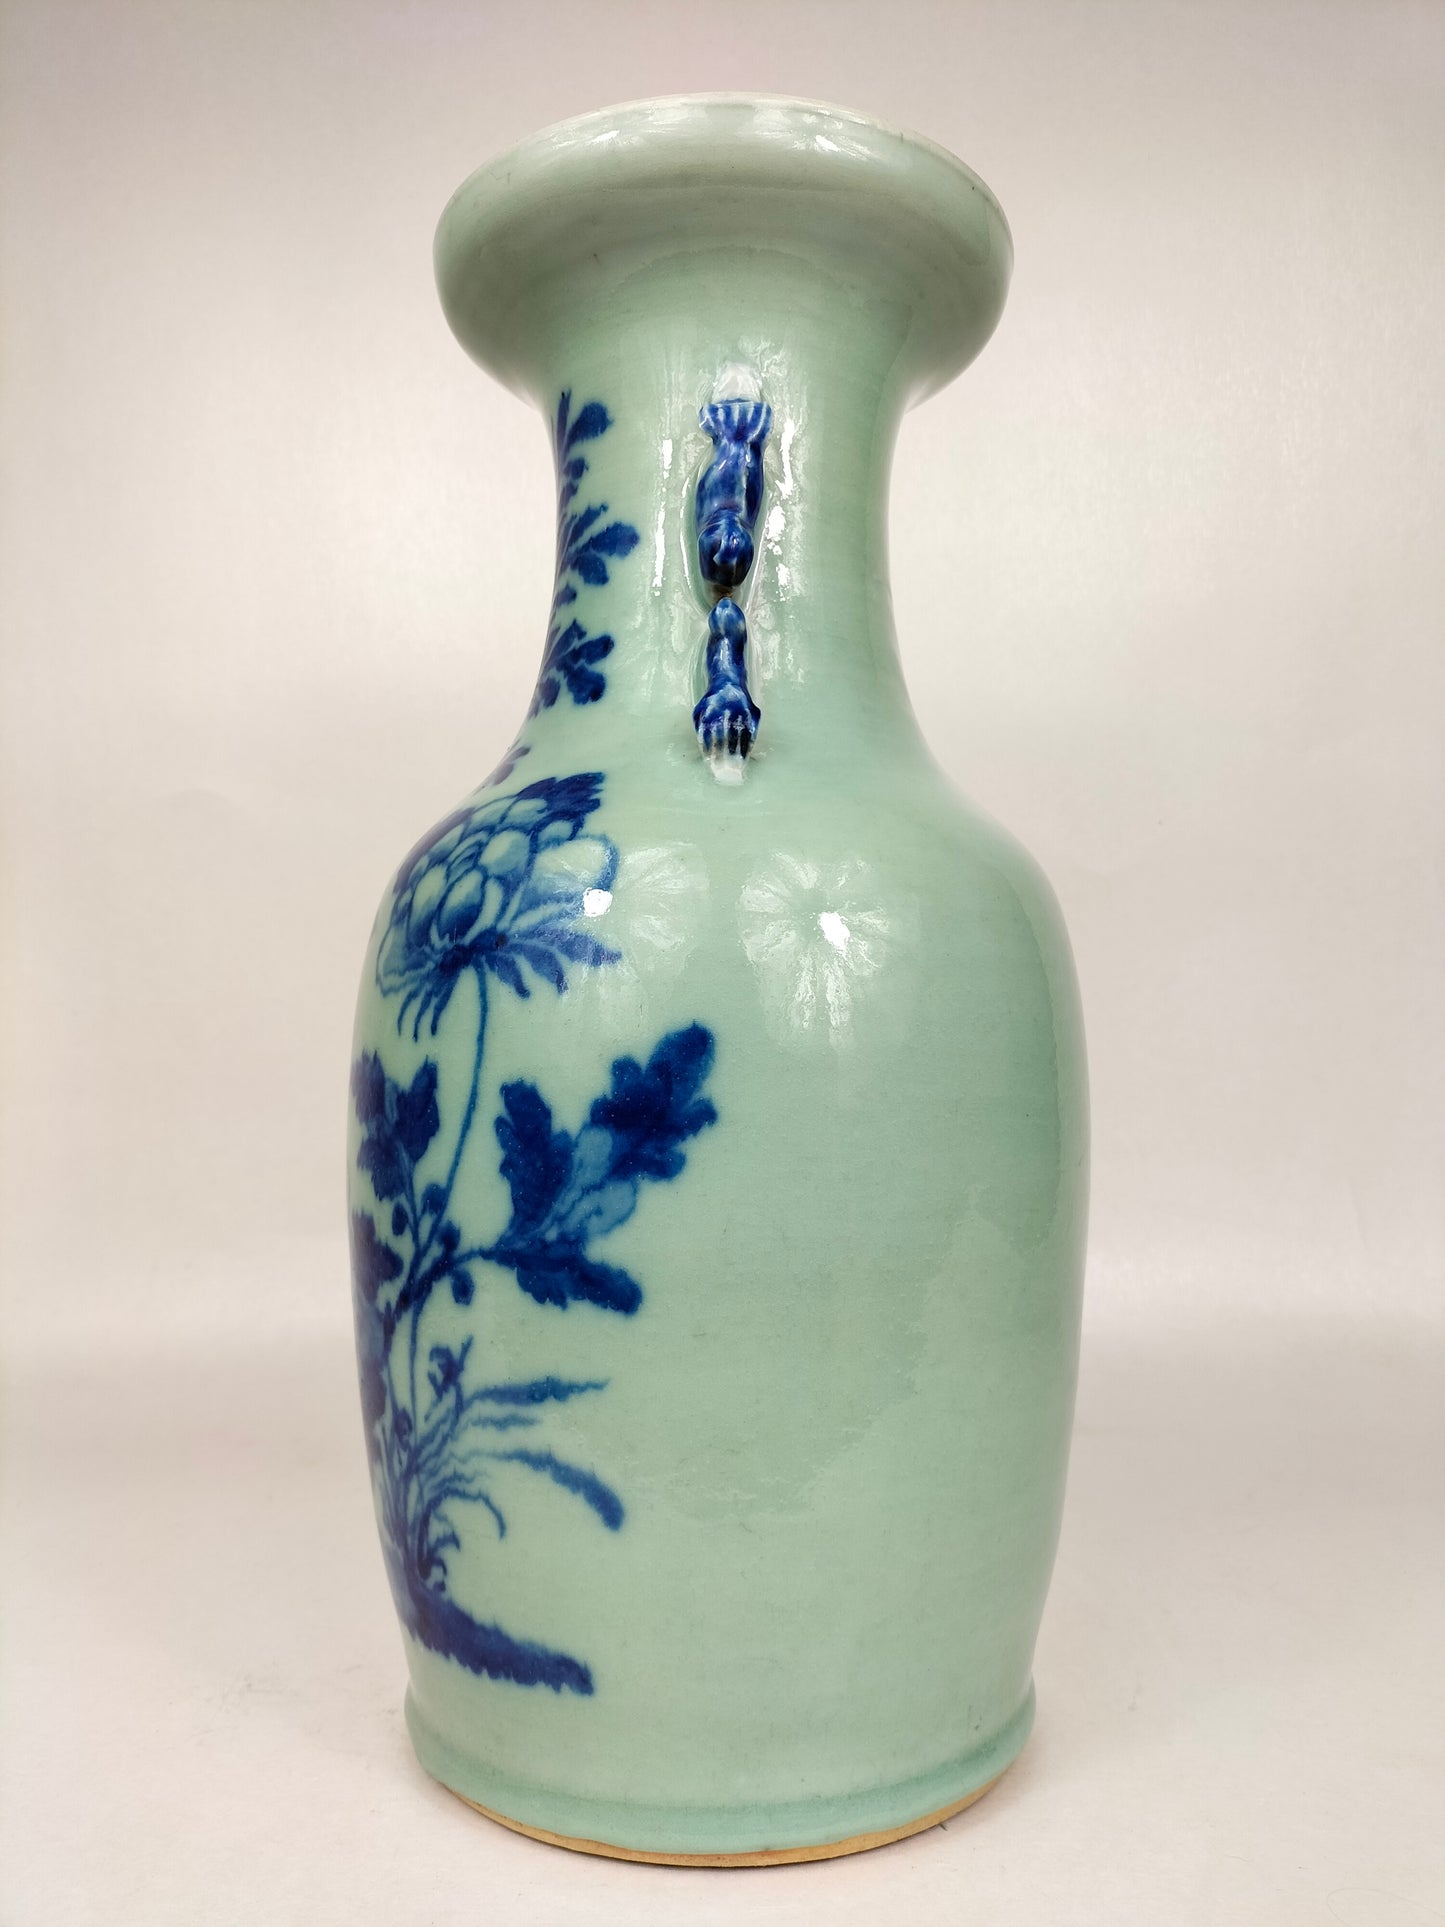 Antique Chinese celadon colored vase decorated with bird and flowers // Qing Dynasty - 19th century